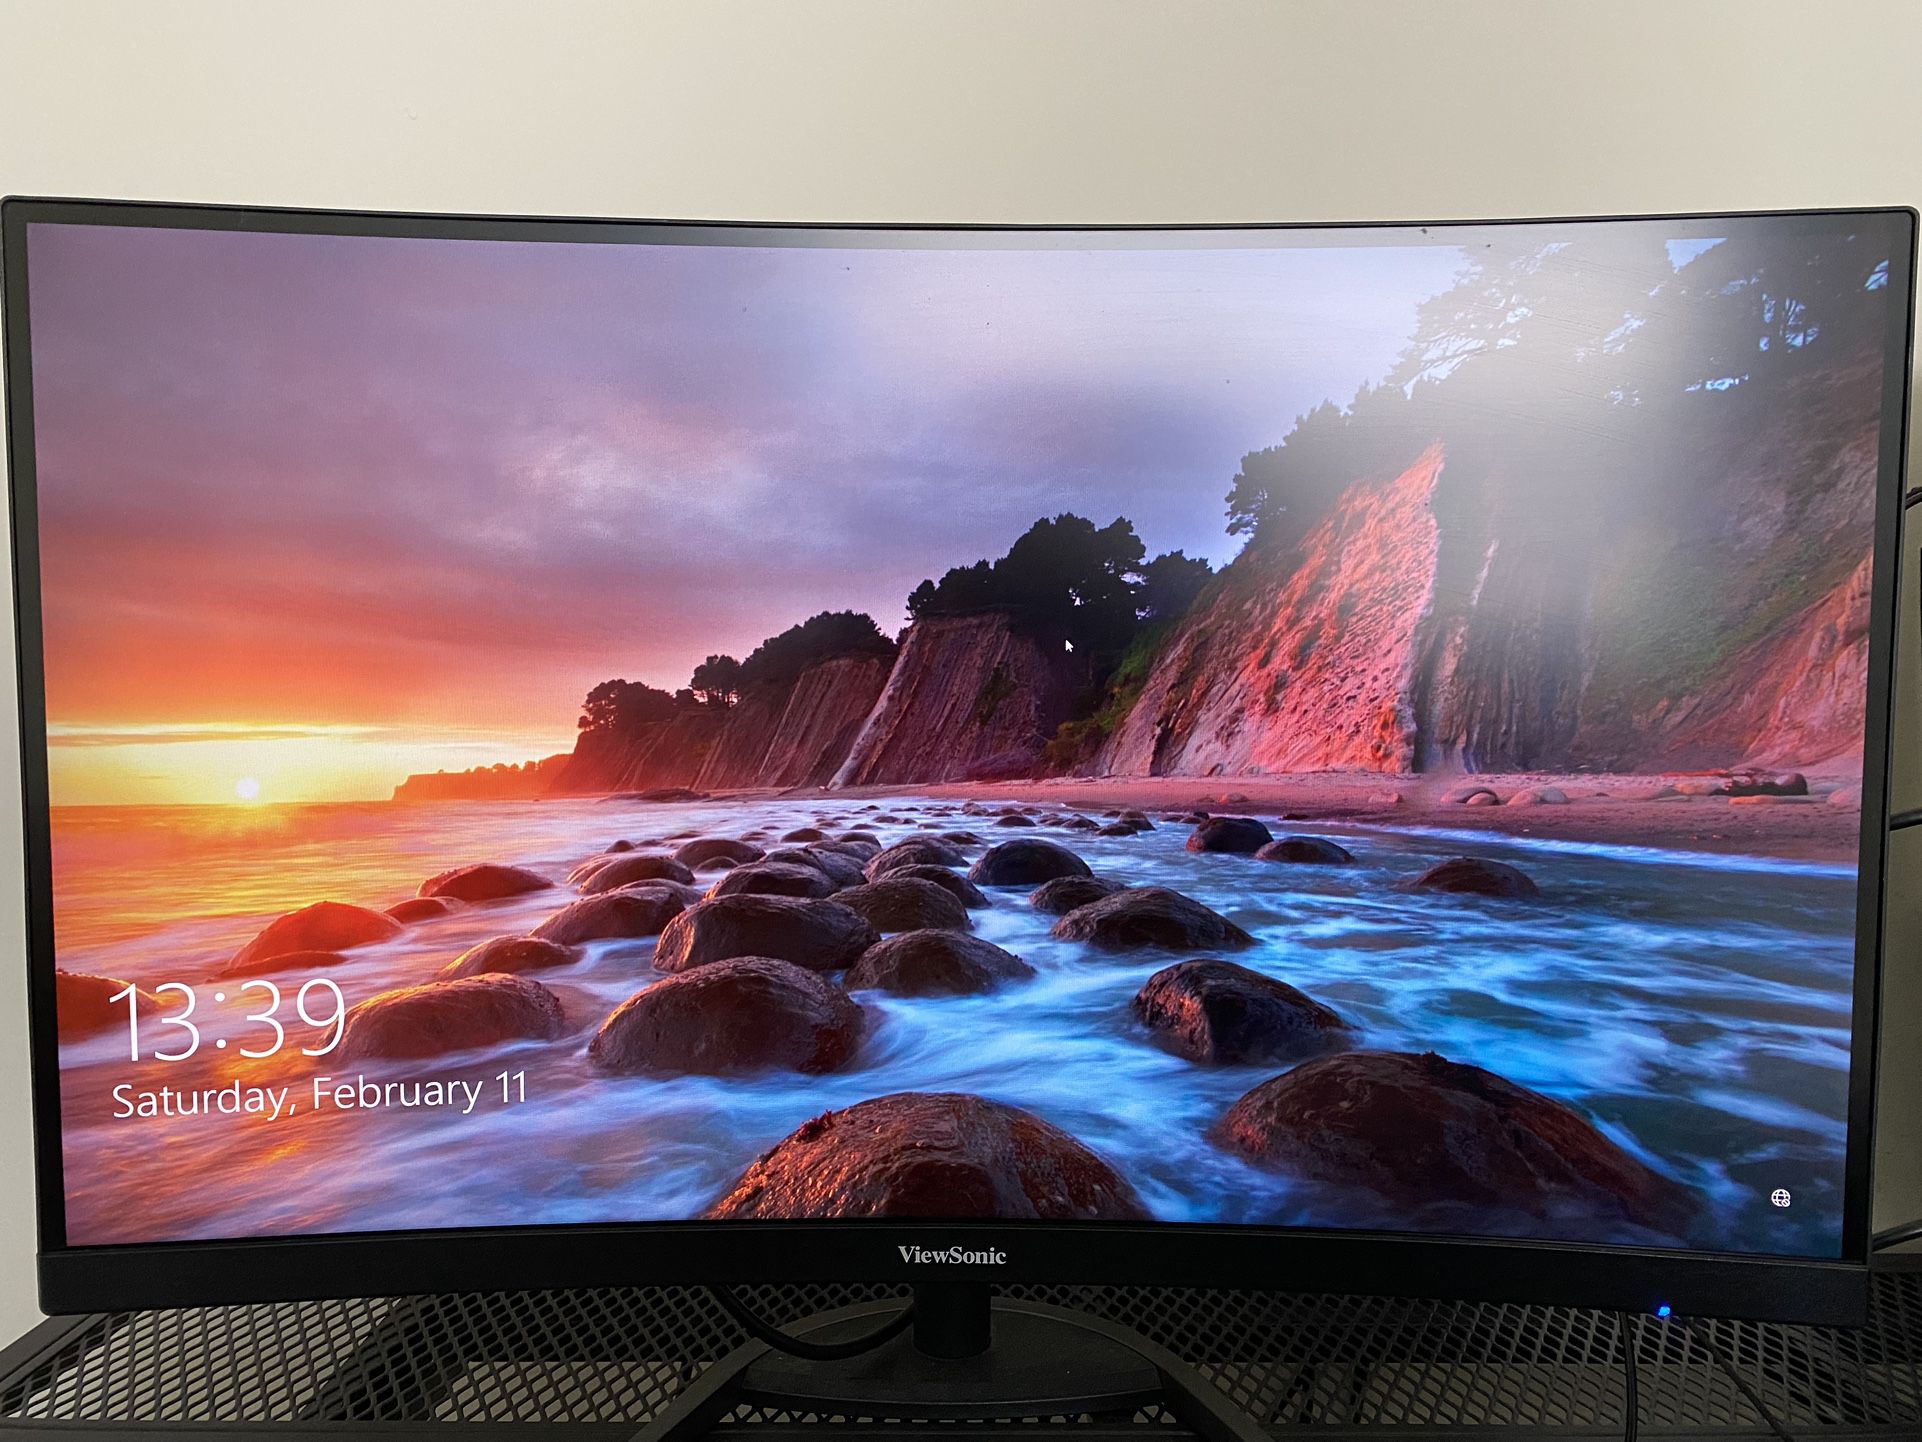 1440p 144hz 27” Curved Monitor